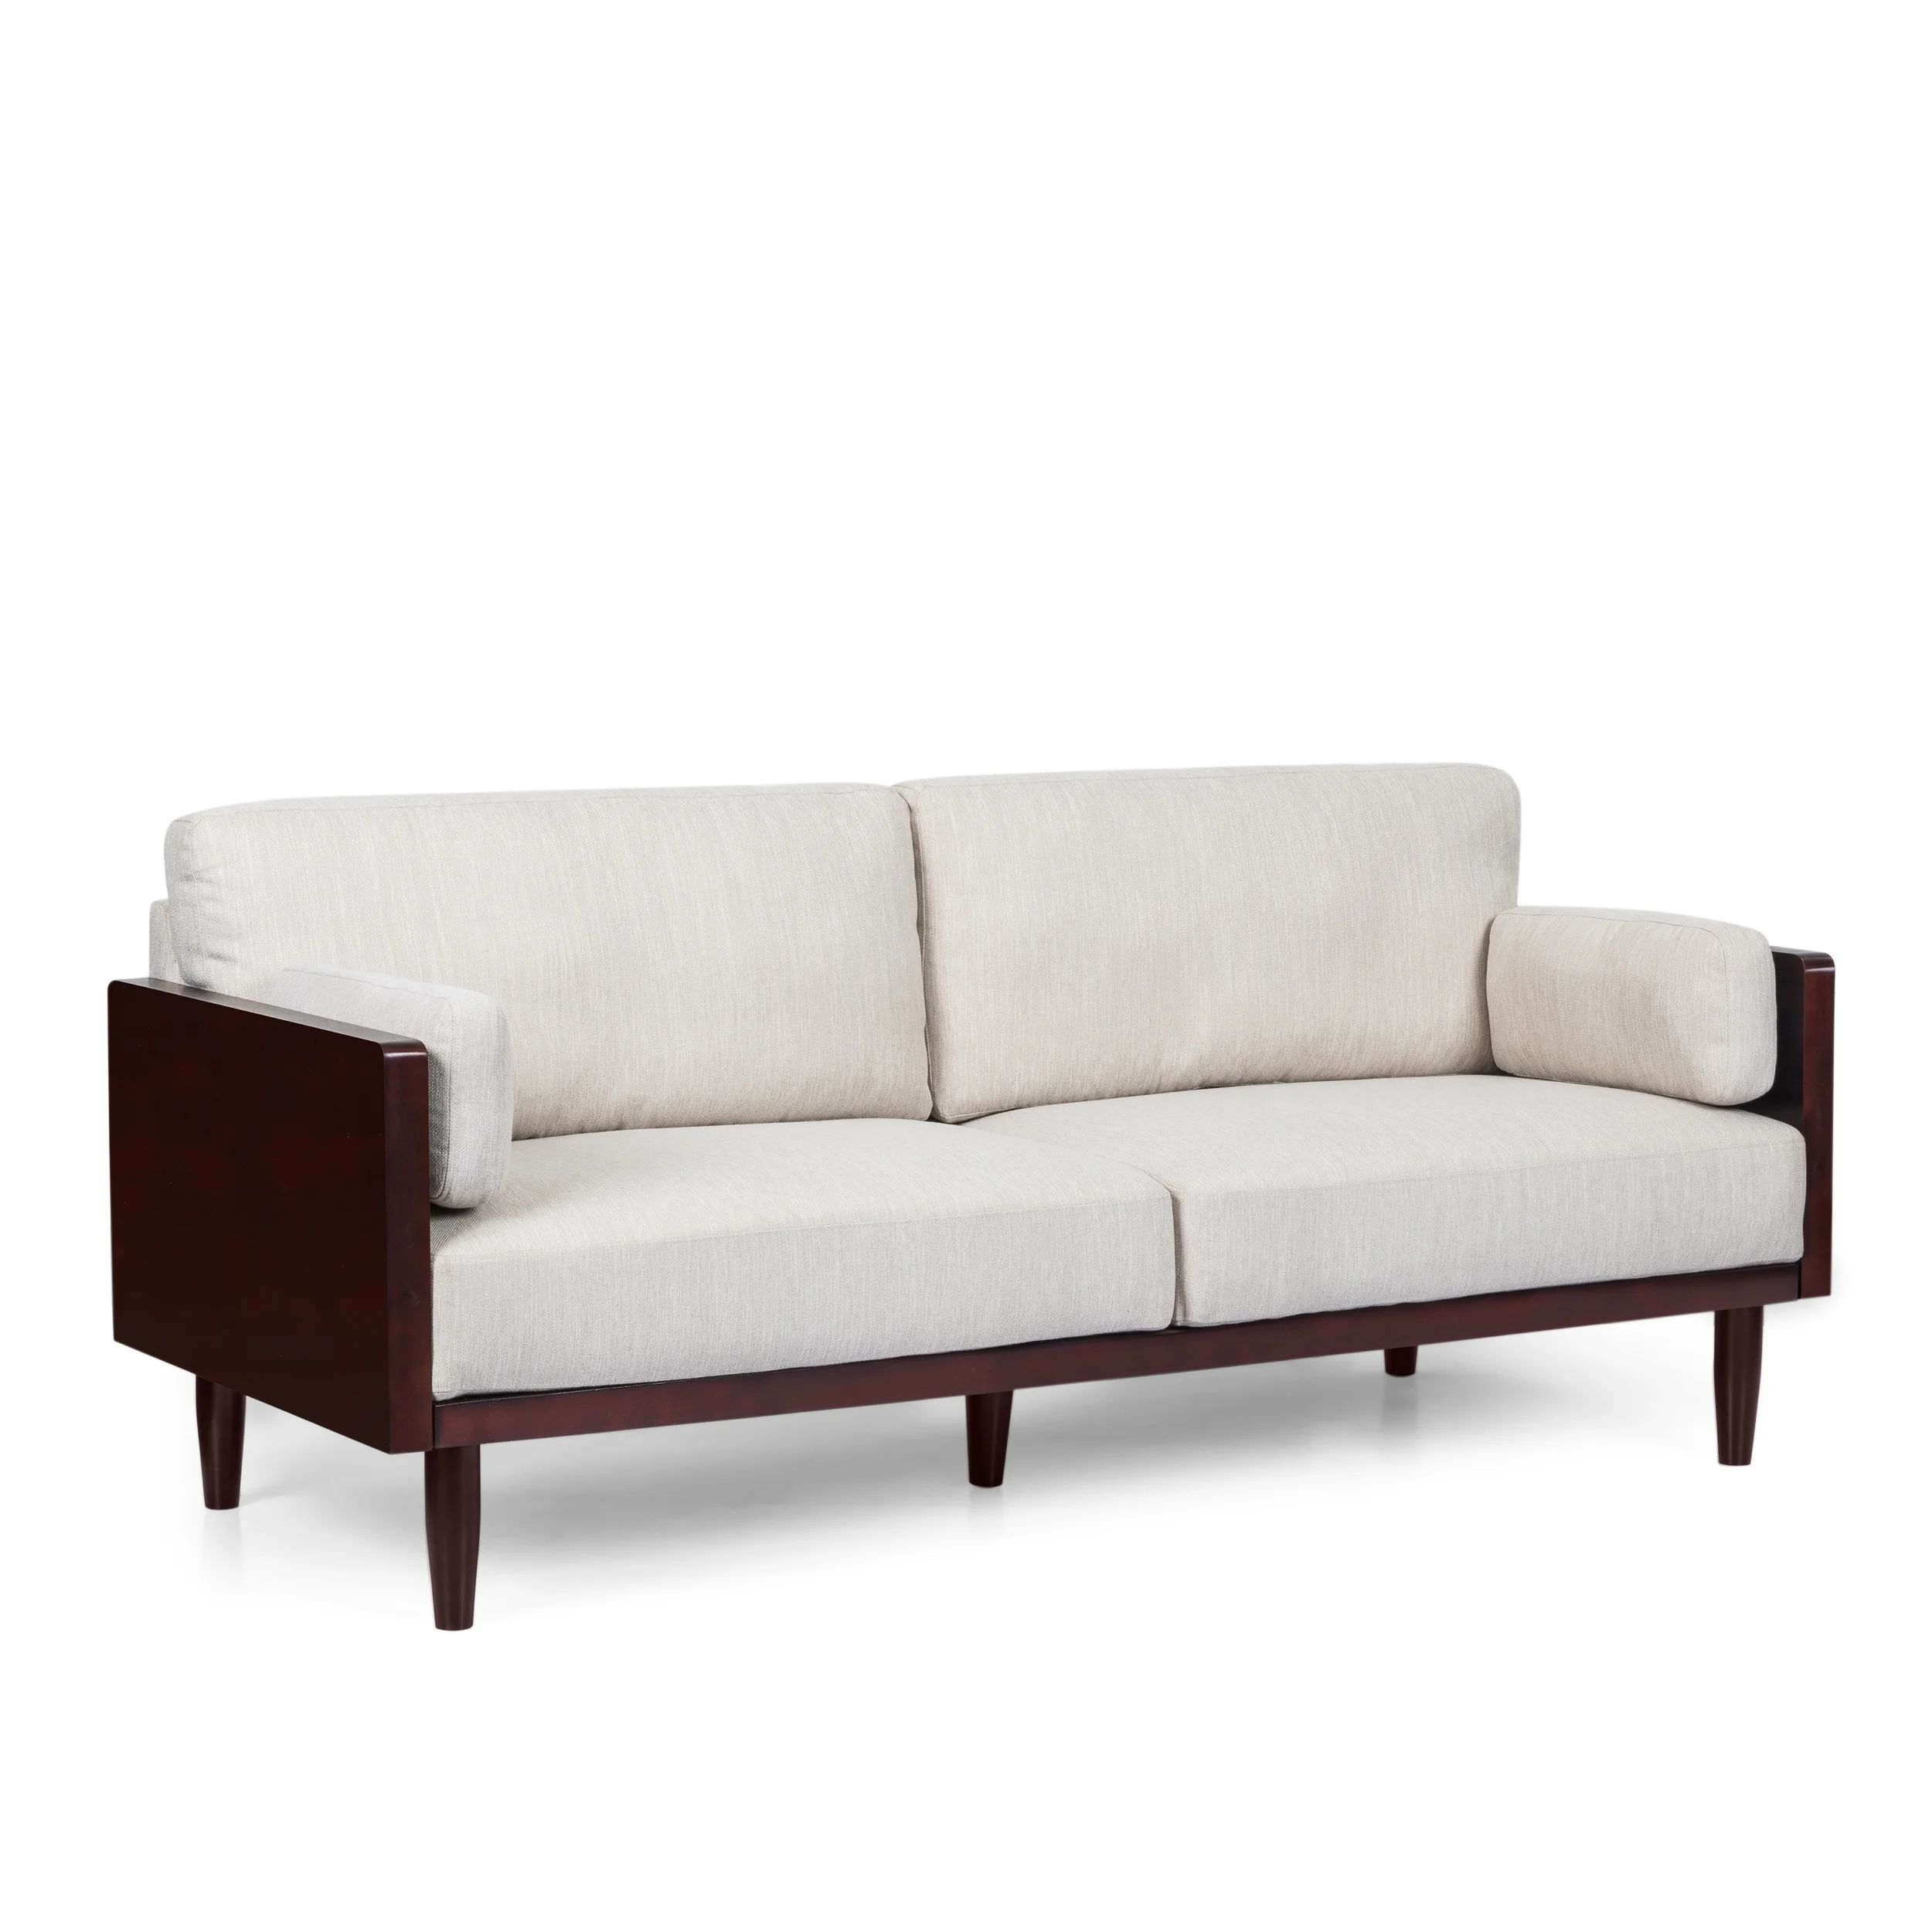 Noble House Forgey Upholstered 3 Seater Sofa, Beige and Dark Walnut | Walmart (US)